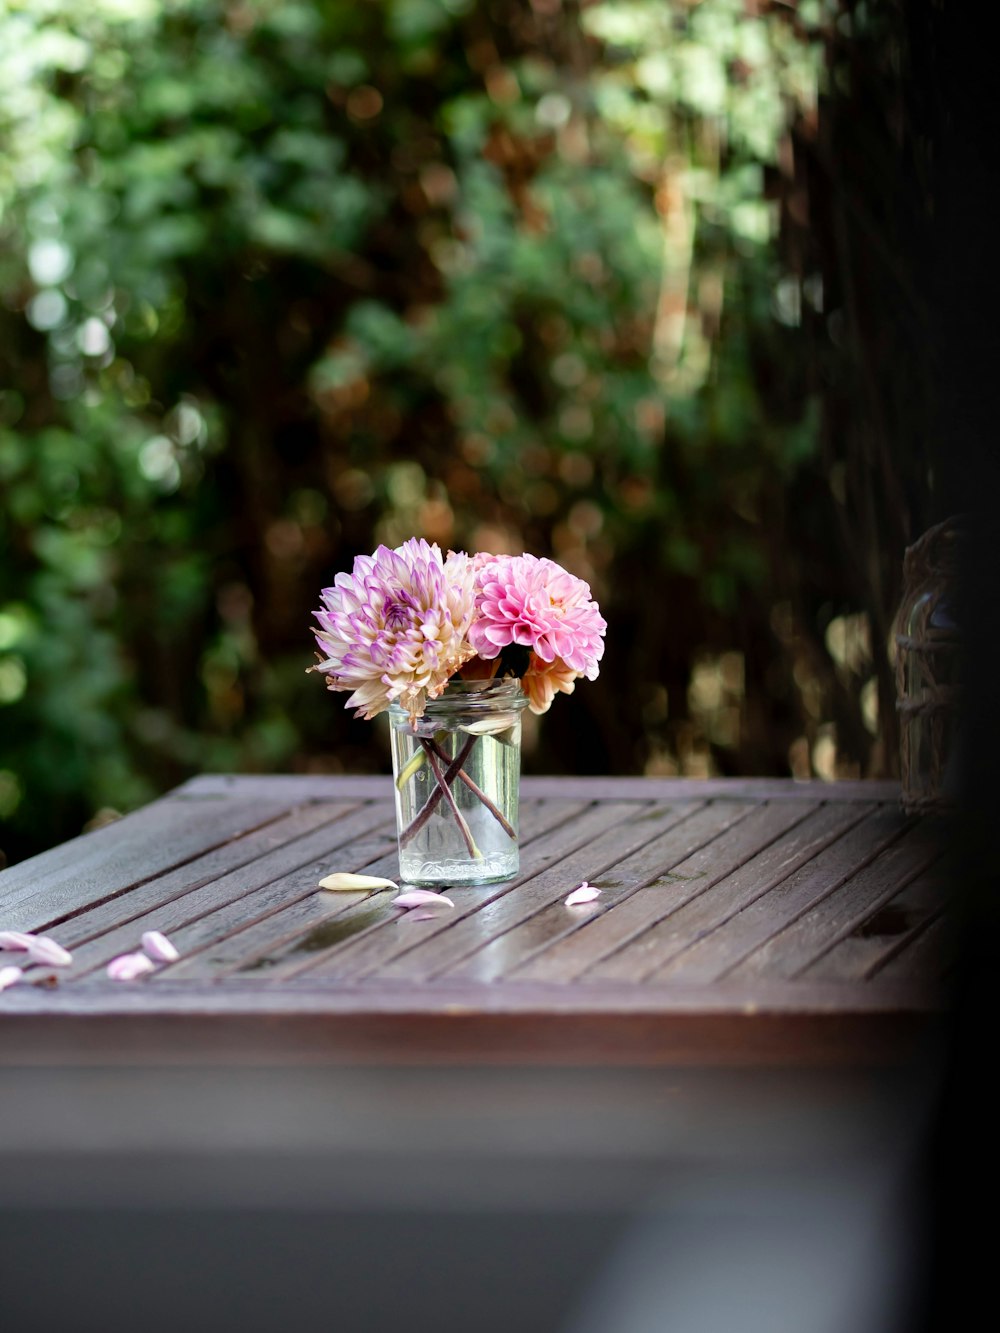 a glass vase filled with pink flowers on a wooden table